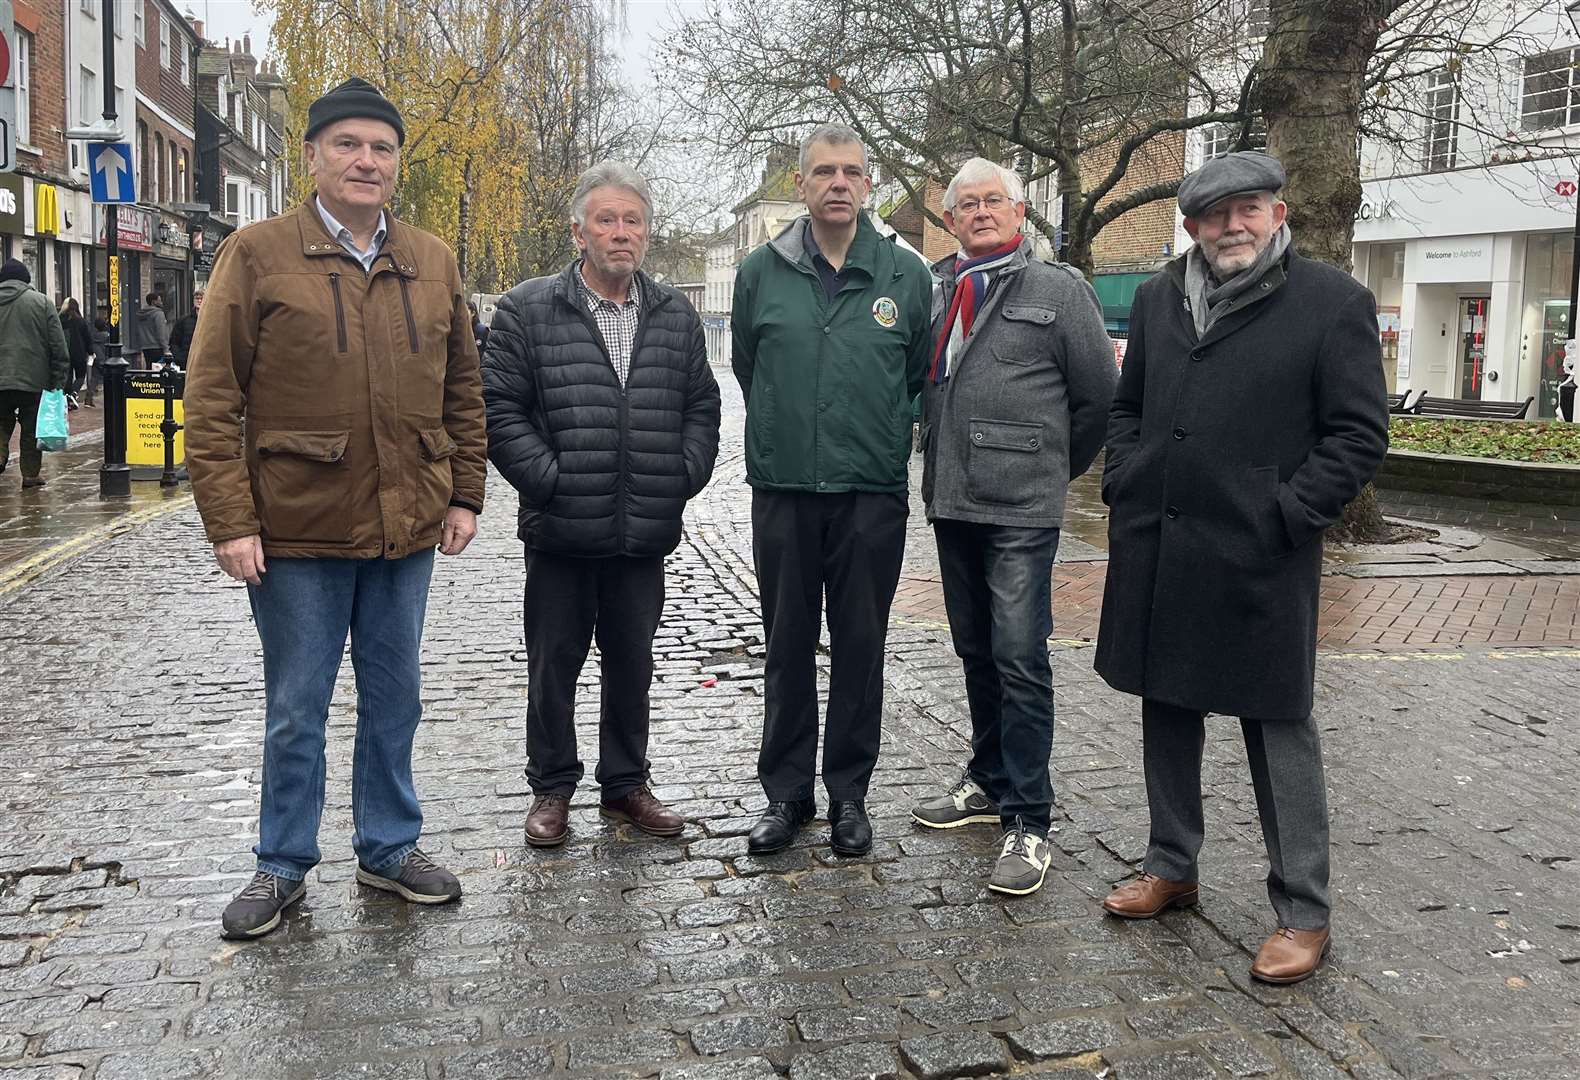 From left to right: Cllr Bernard Heyes (Con), Geoff Mathews of Soundcraft Hi-Fi, Cllr Paul Bartlett (Con), Vernon Seager of Central Ashford Community Forum and Cllr Charles Suddards (Lab) in the Lower High Street